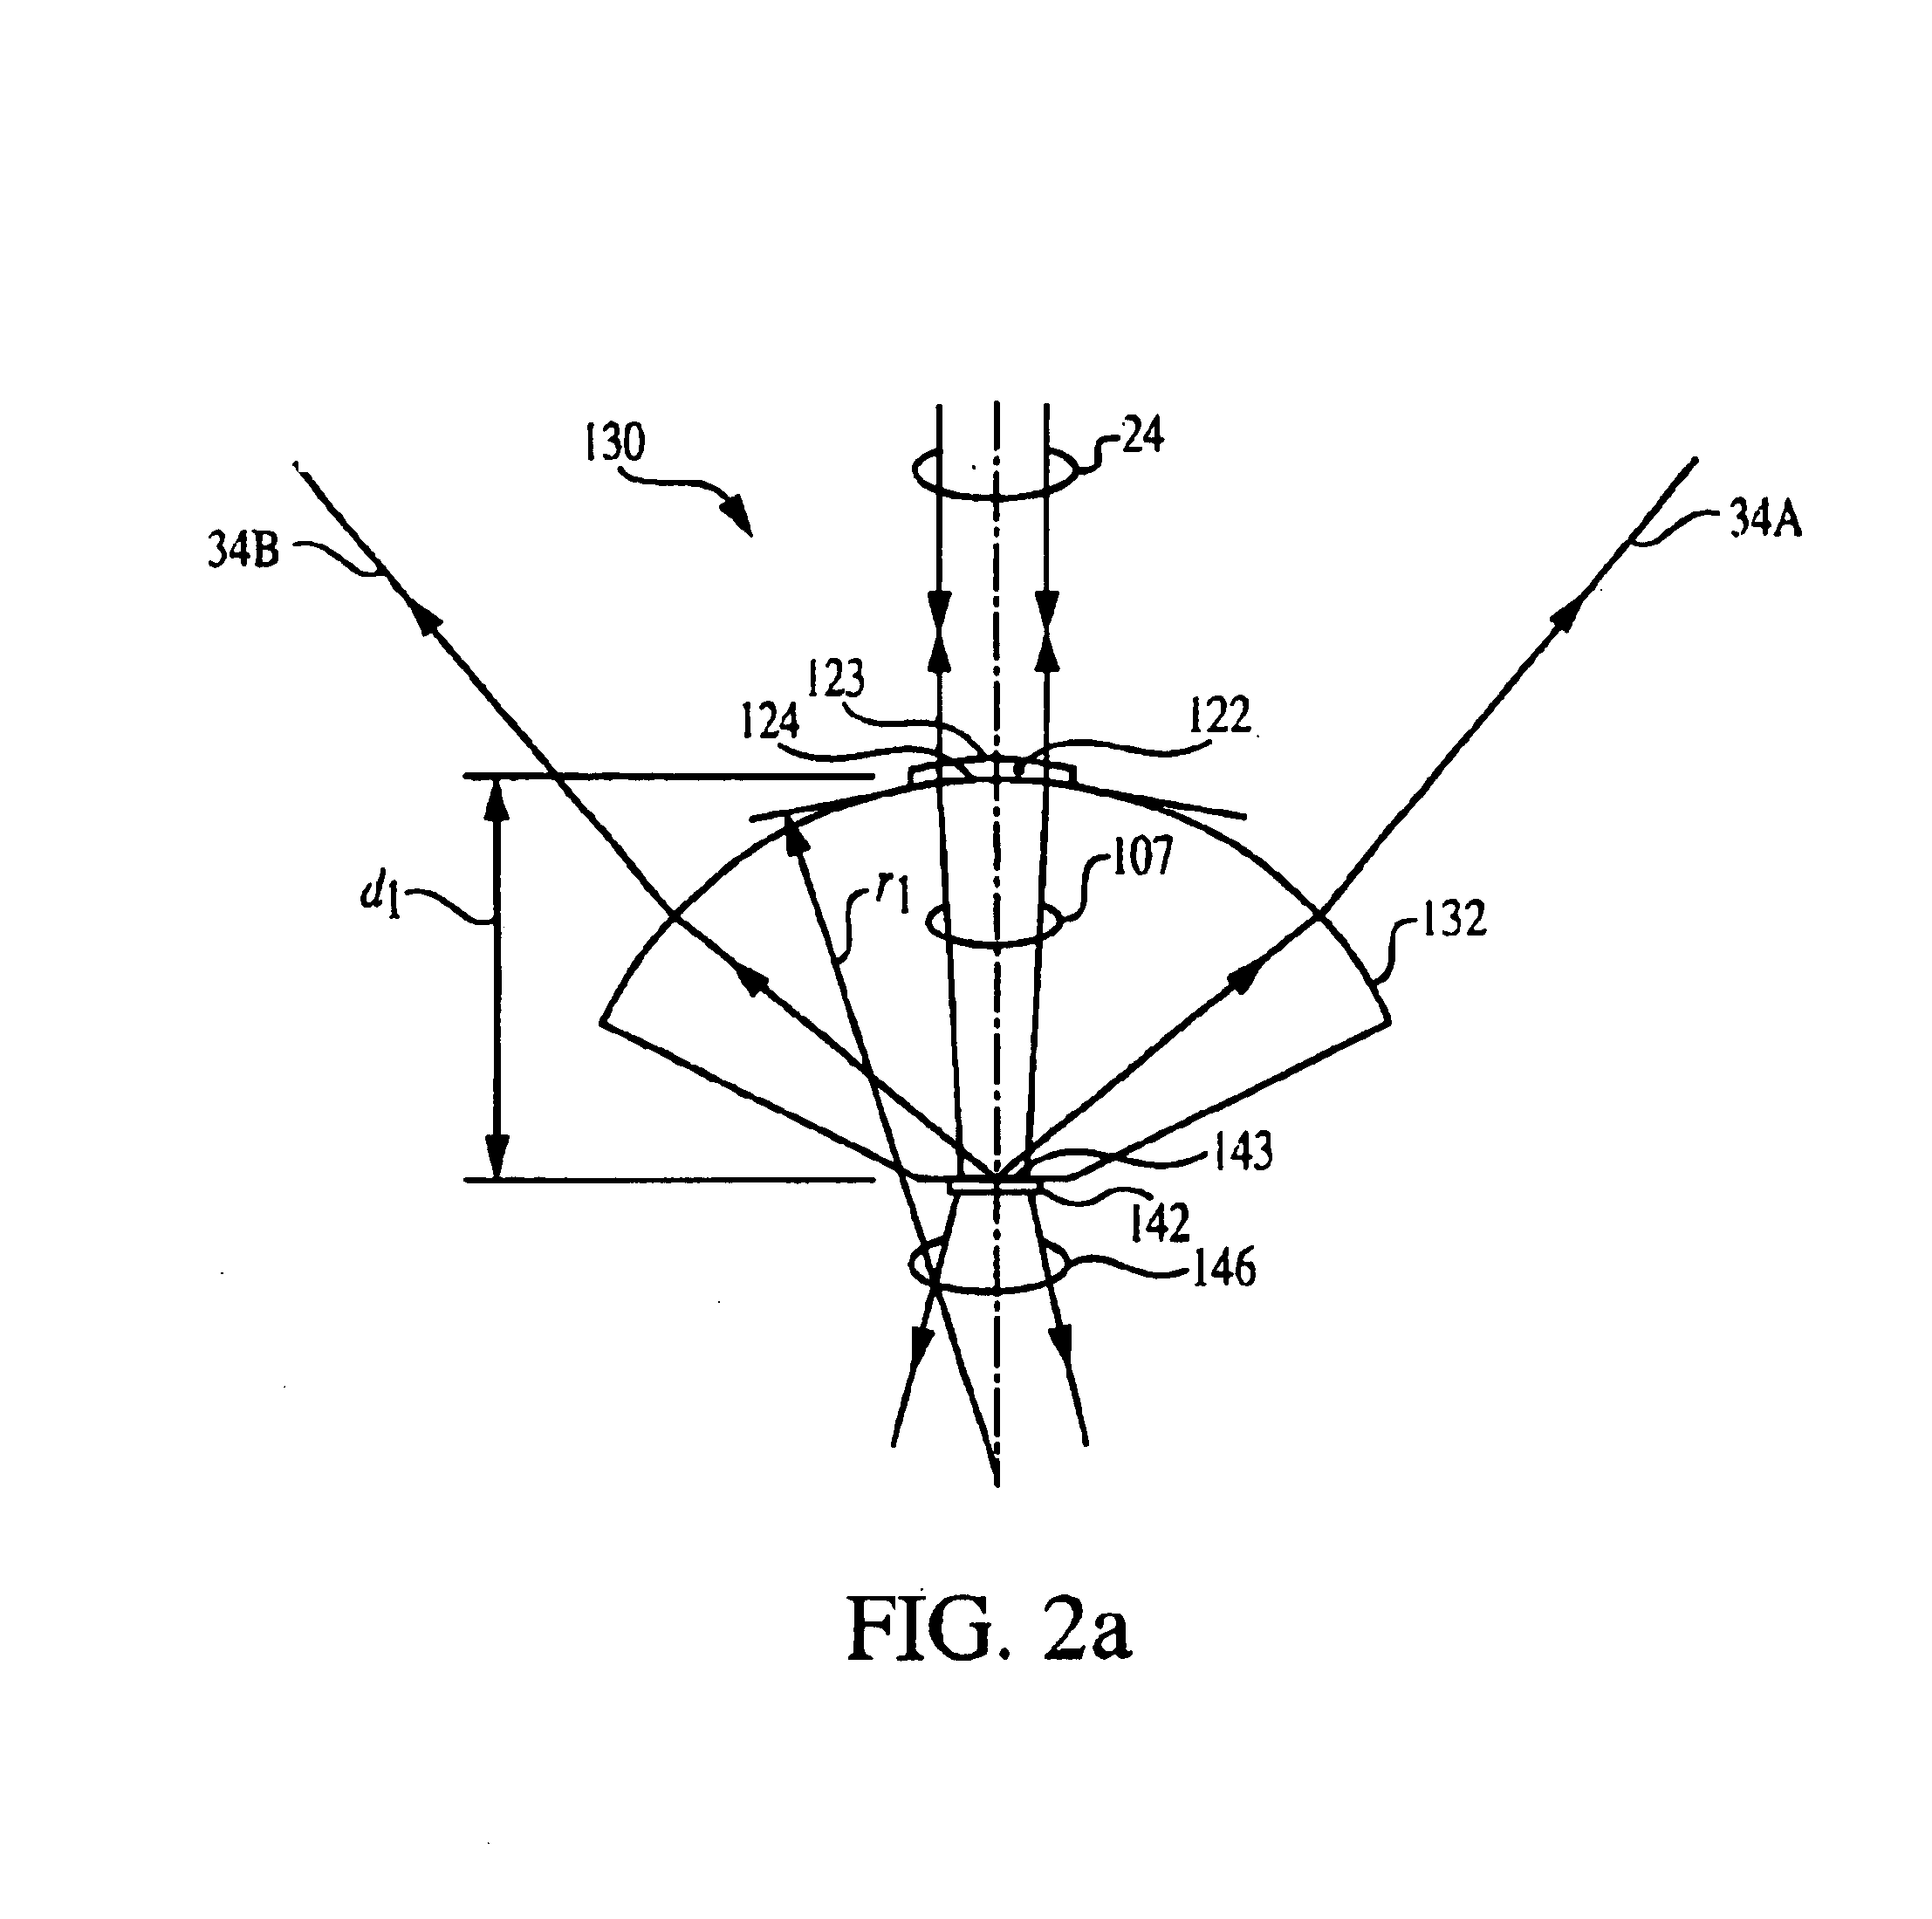 Multiple-source arrays with optical transmission enhanced by resonant cavities